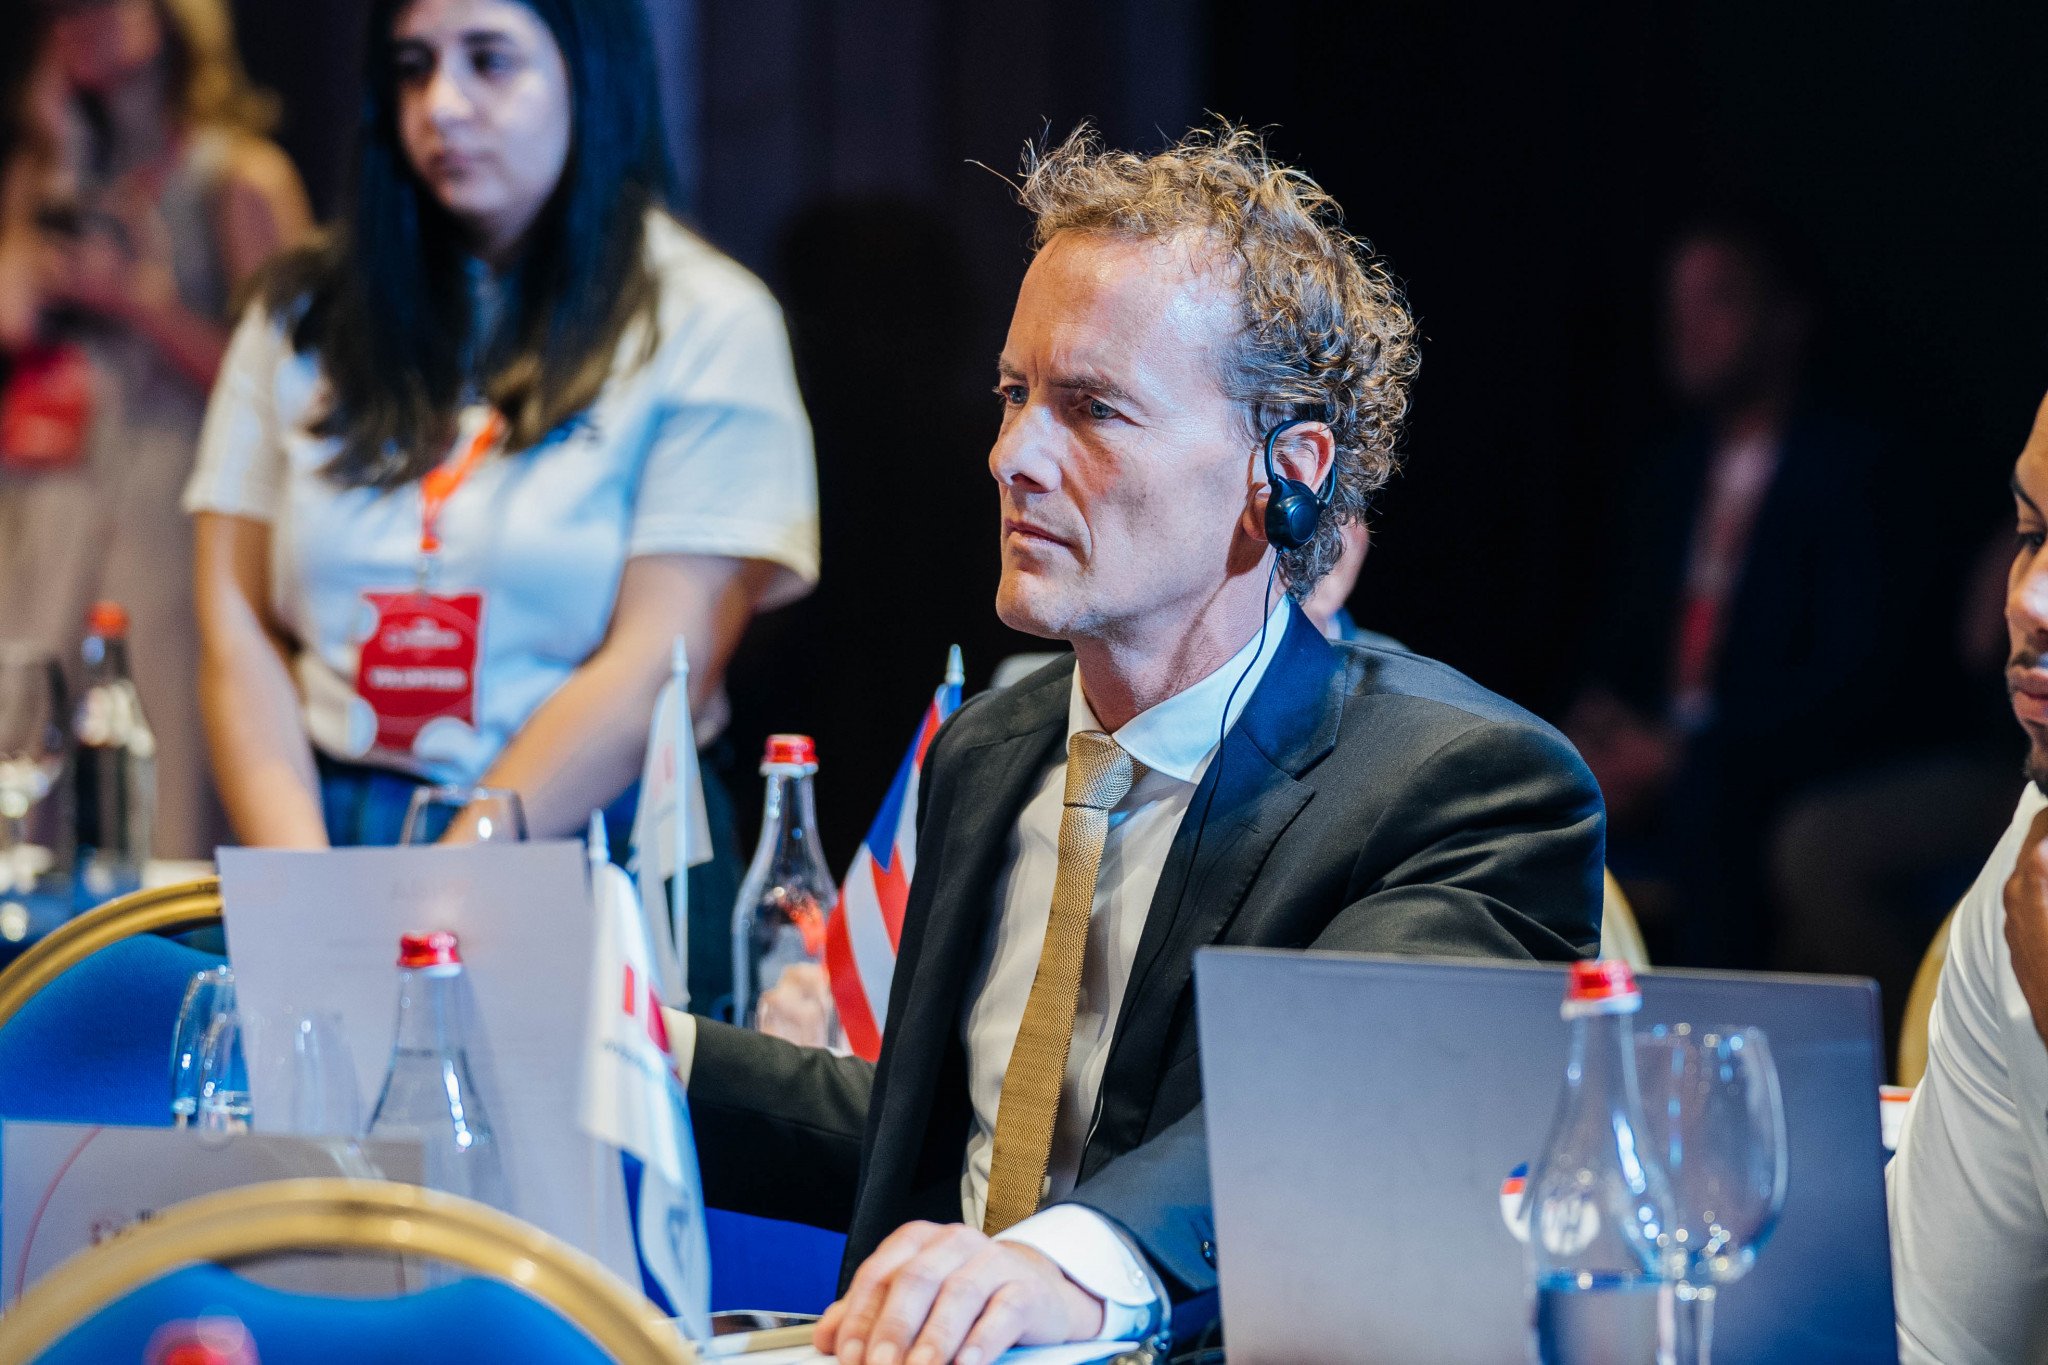 Boris van der Vorst and most of his supporters left the IBA Extraordinary Congress when the decision not to hold an election was revealed ©IBA